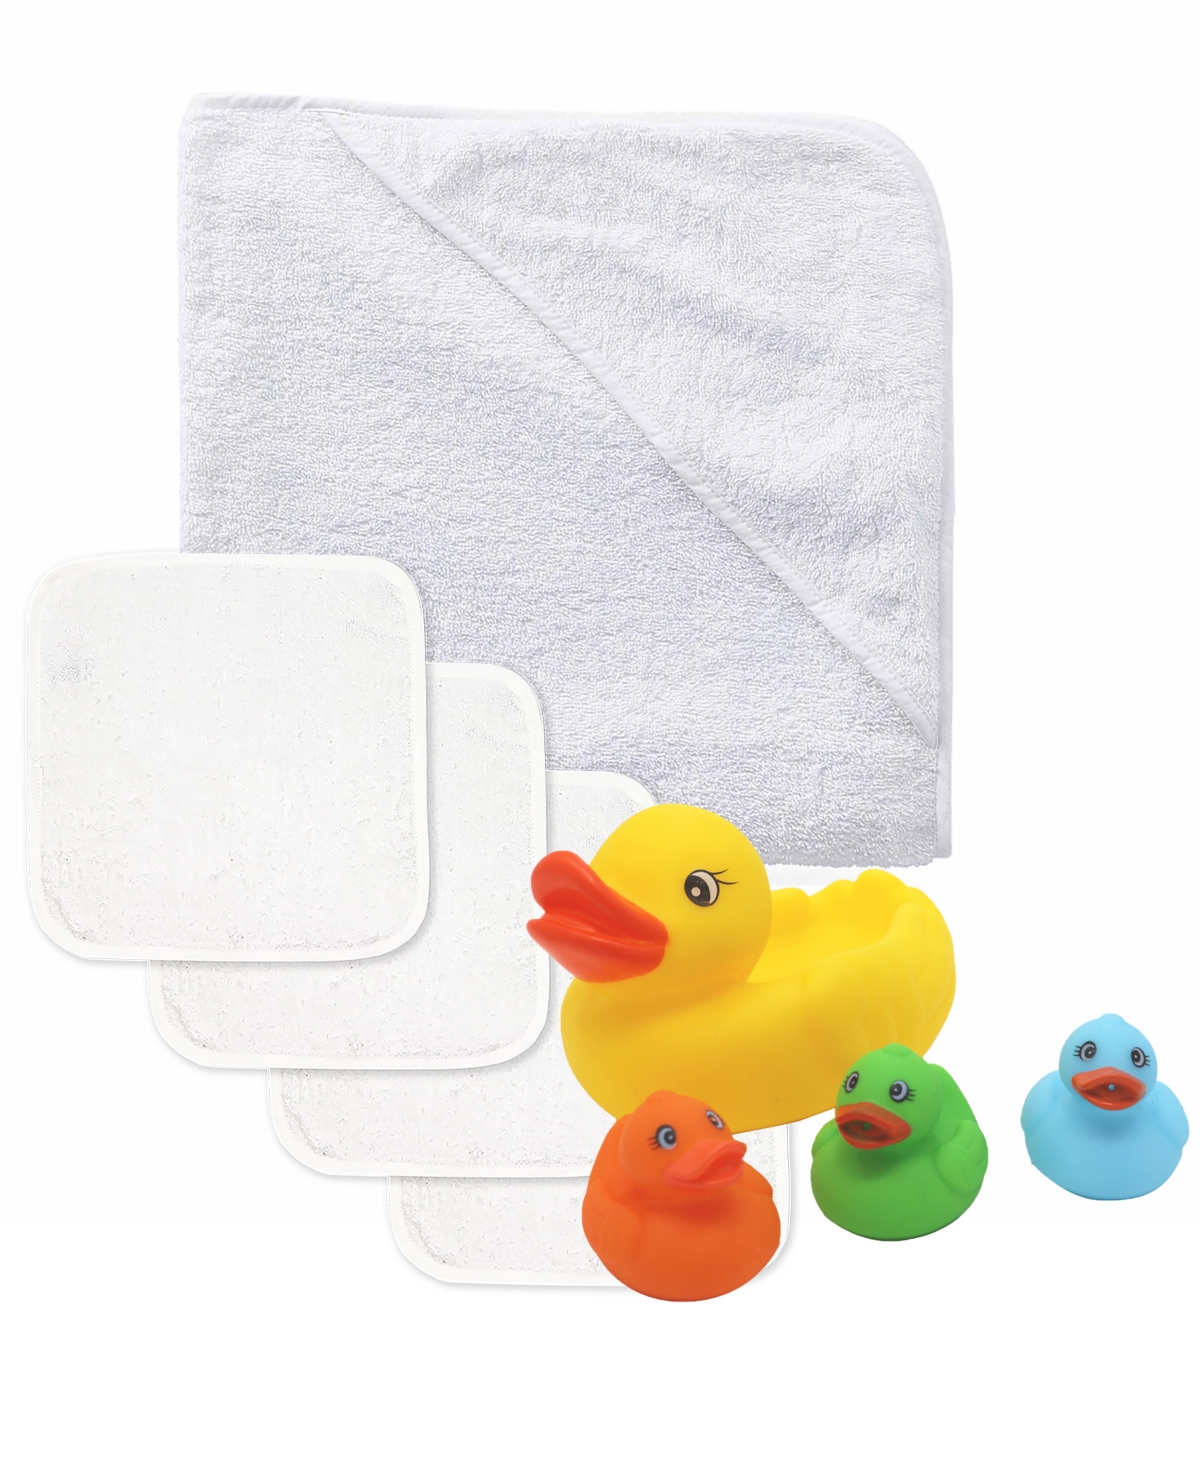 Baby Mode Signature Baby Boys Or Baby Girls Bath Towel, Washcloth, And Toys, 9 Piece Set In White